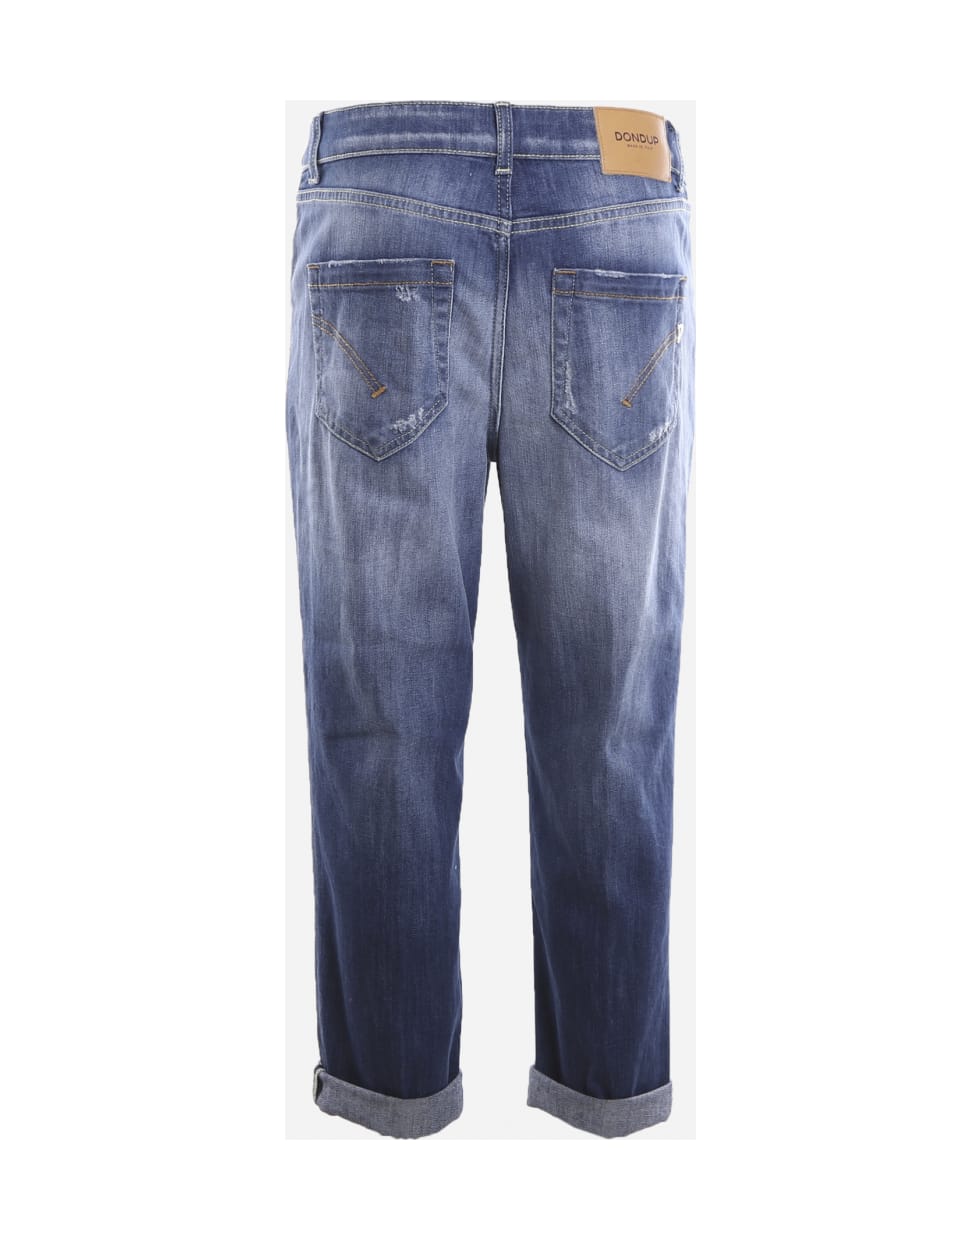 Dondup Used-effect Denim Jeans With Cuts - Blue